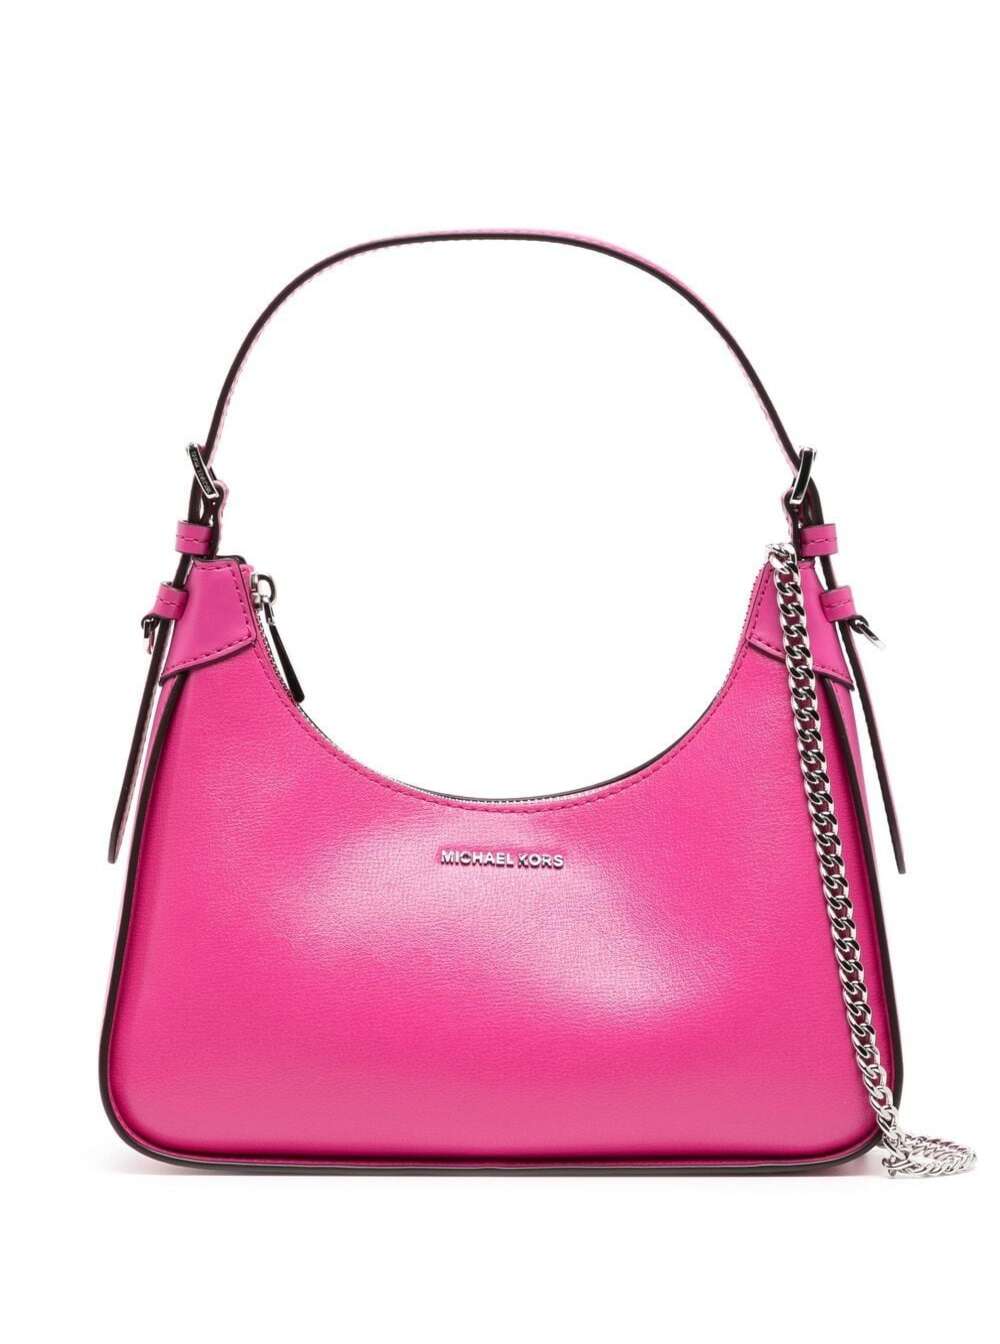 MICHAEL KORS: Michael Wilma bag in leather and coated fabric - Pink